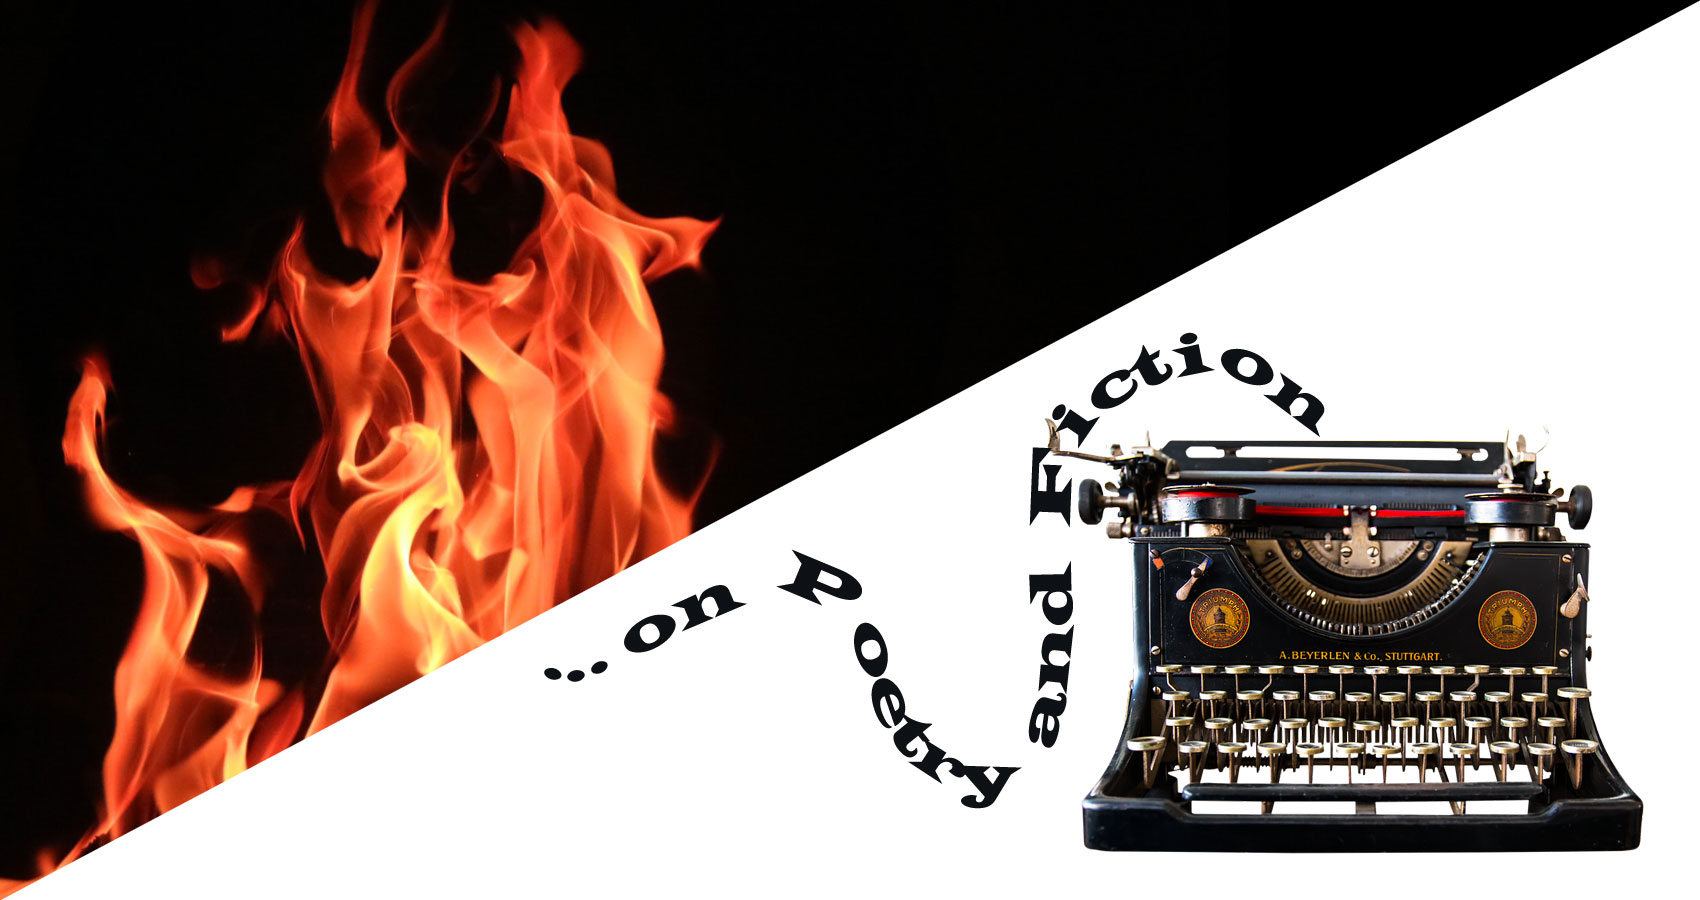 ...On Poetry and Fiction - Just “One Word” Away ("Fire"), editorial by Phyllis P. Colucci at Spillwords.com